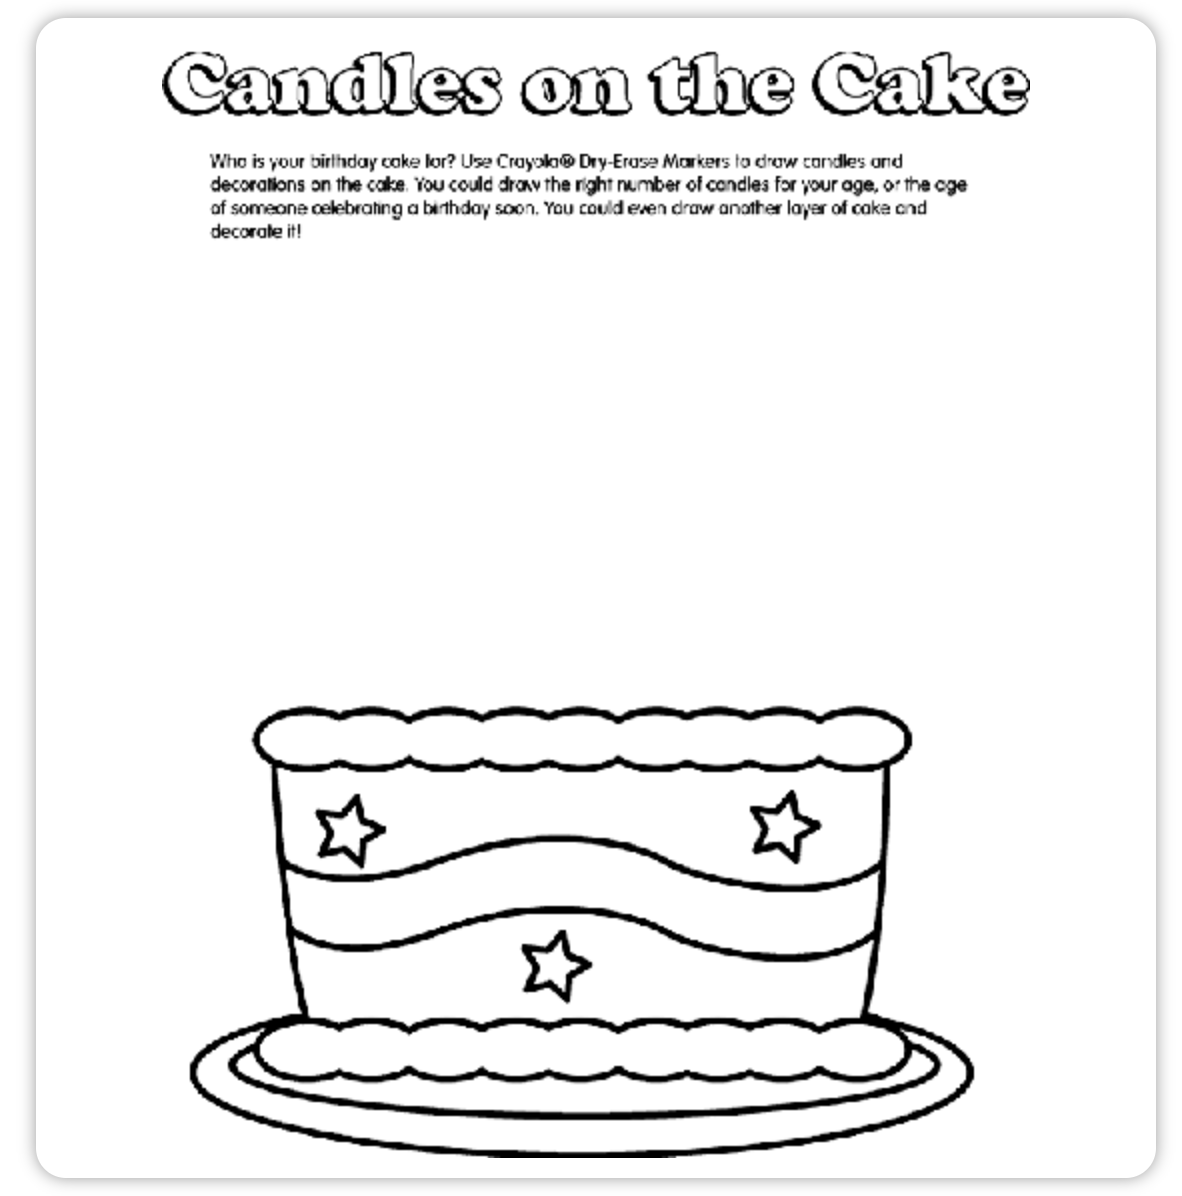 Printable Lets Make a Cake Activity Sheets. Decorate a Cake - Etsy